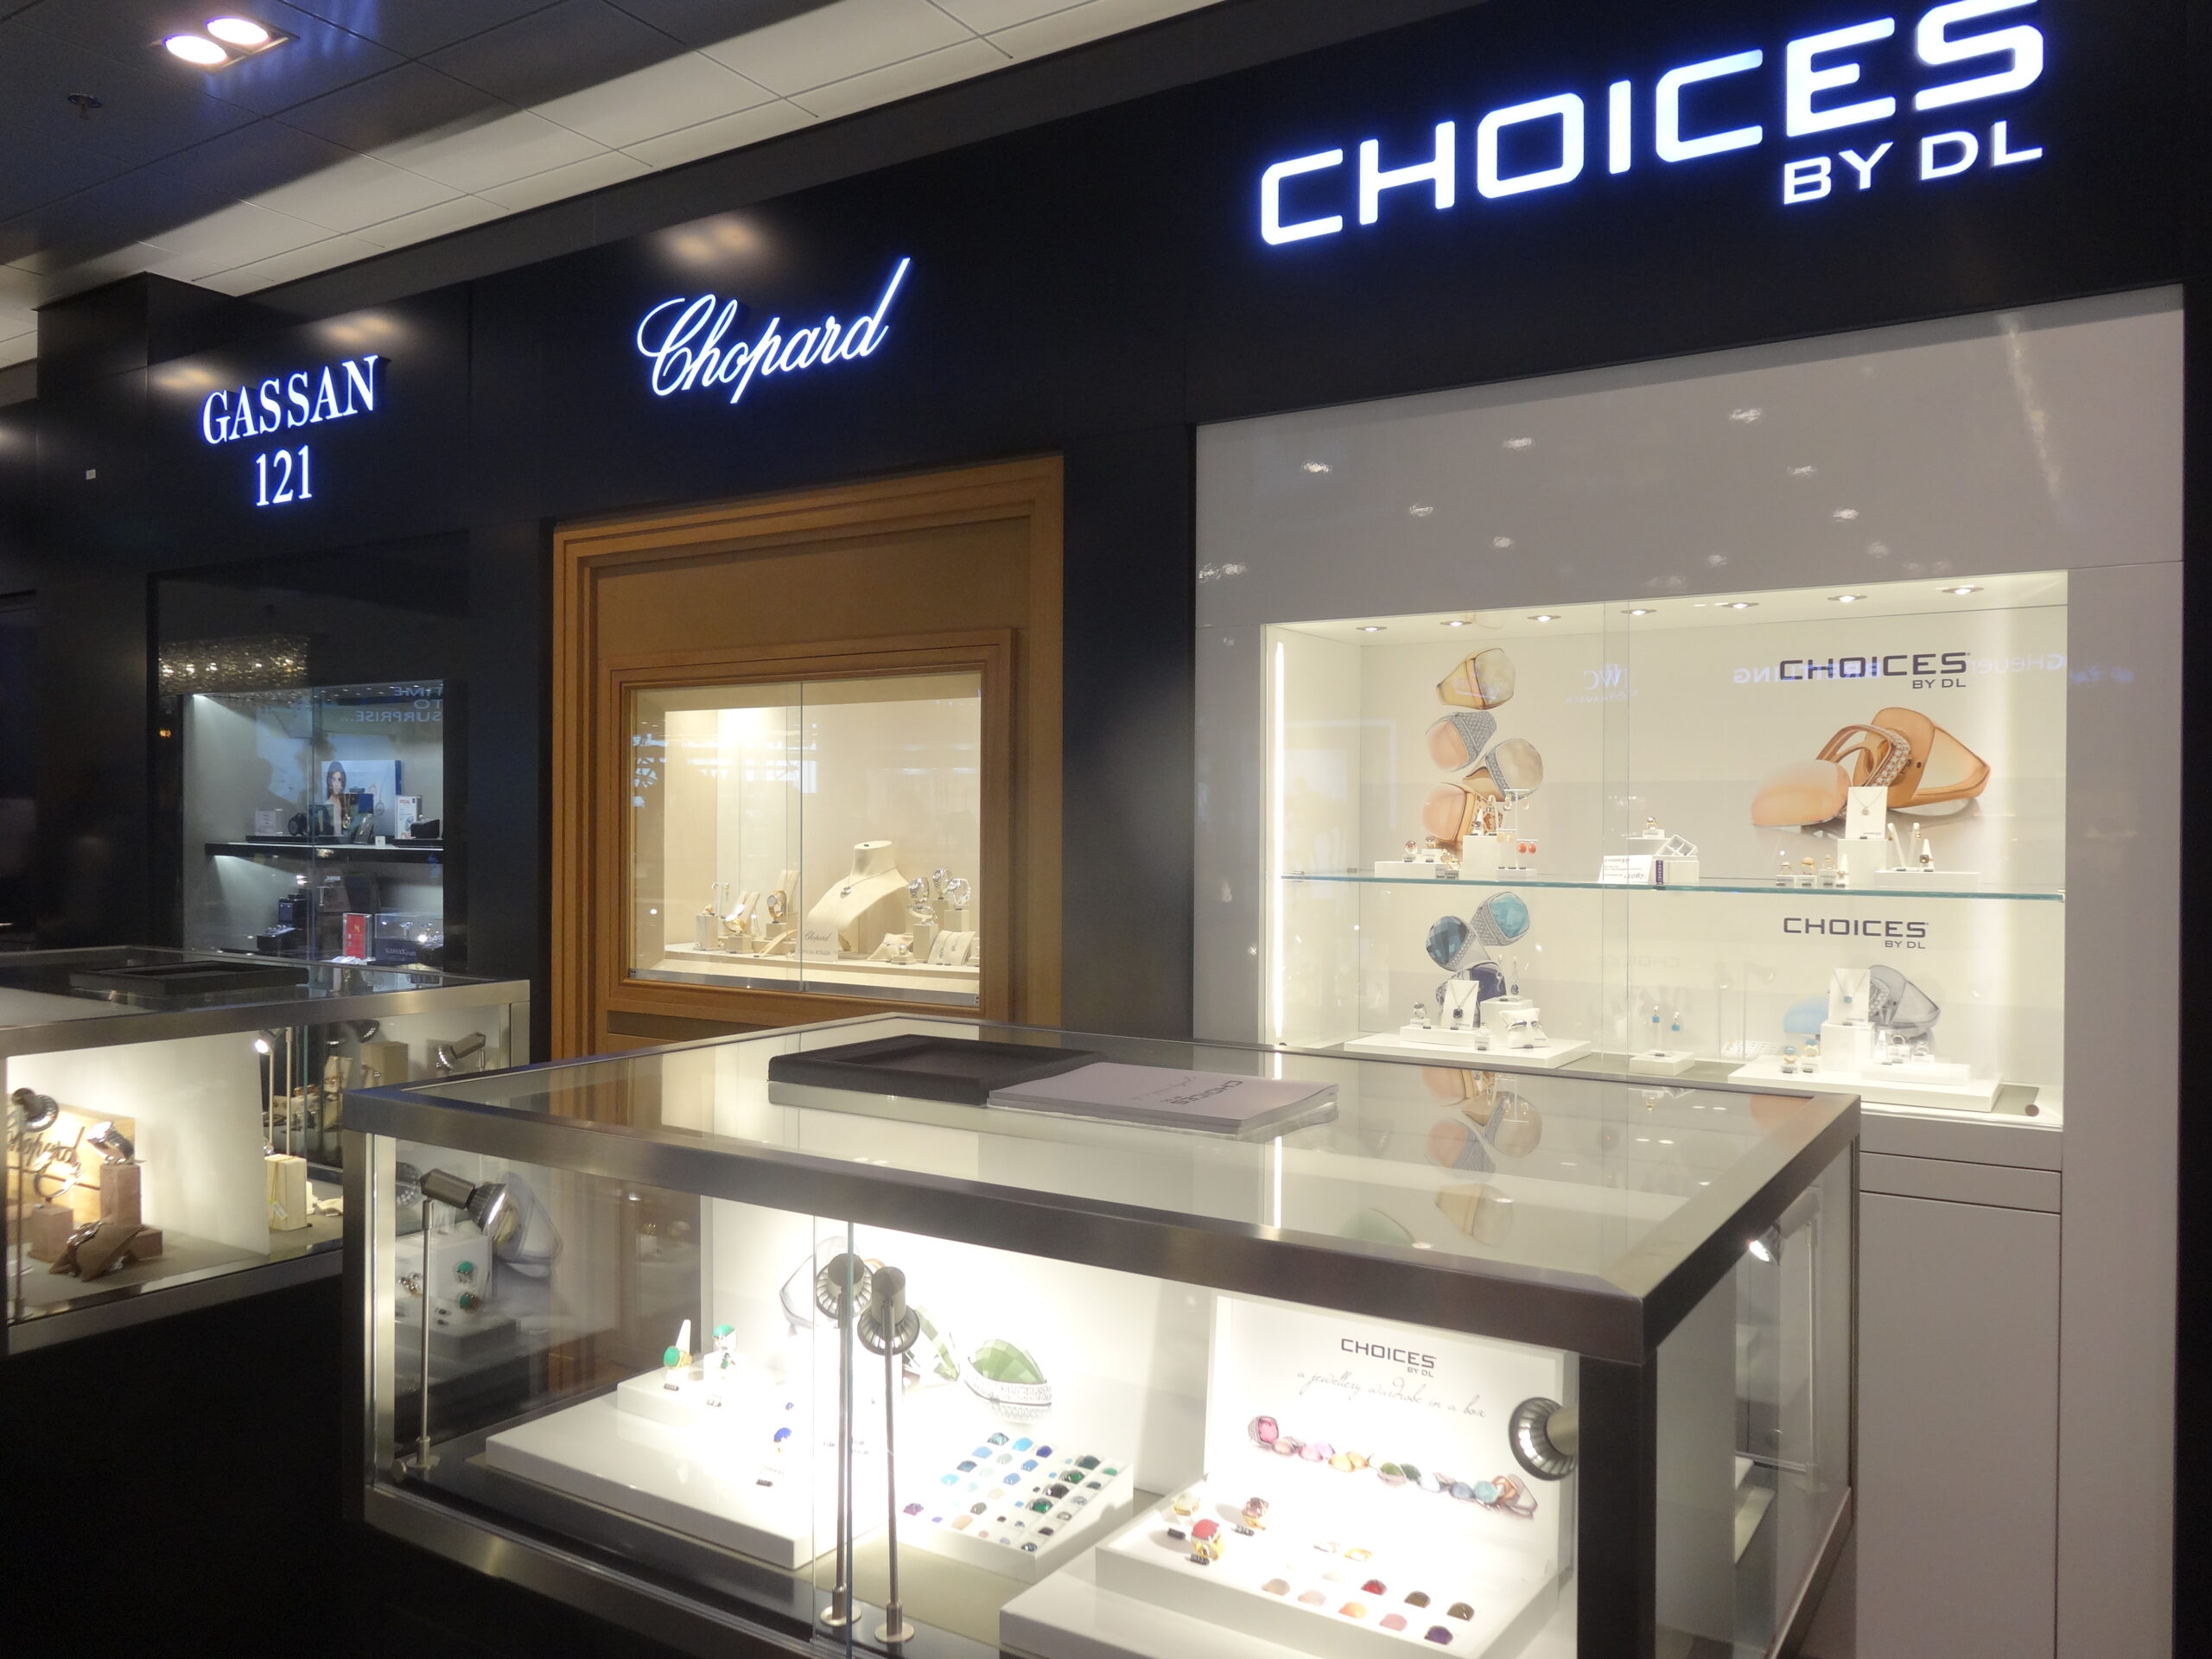 Adding a brilliant shine: Diamonds from Gassan 121, Chopard and Choices by DL are key features of the new Gassan store